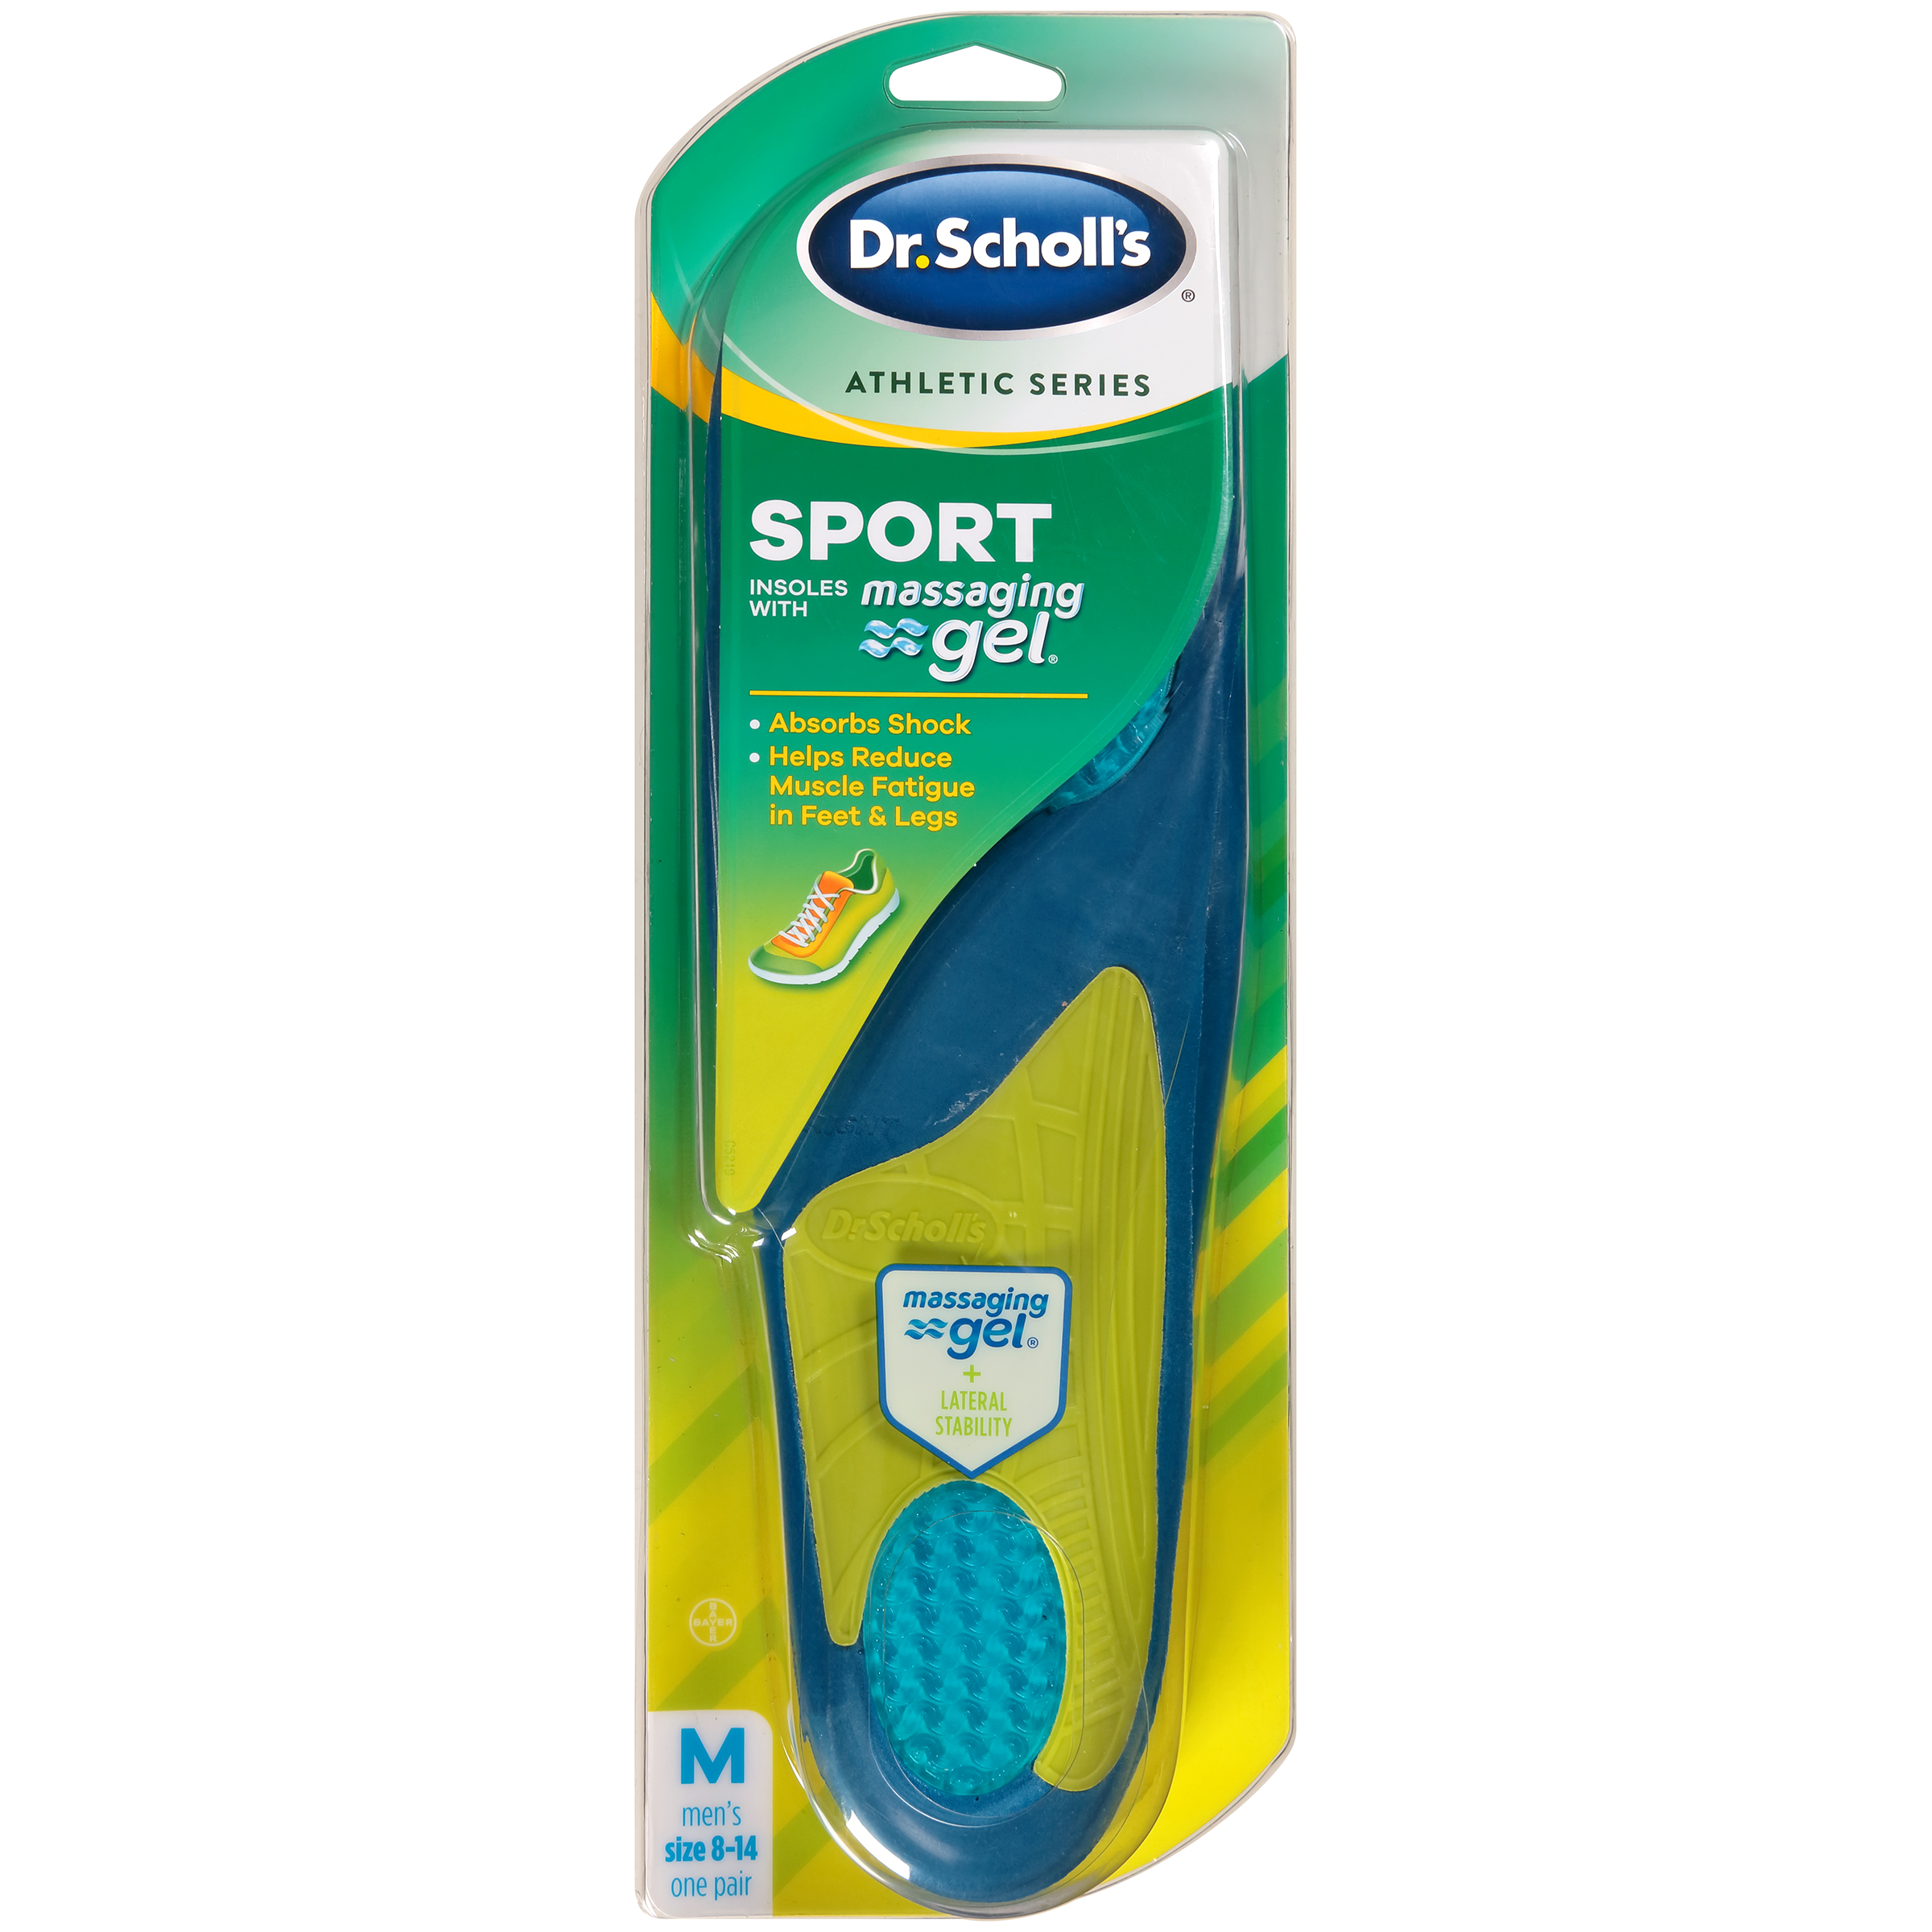 Dr. Scholl's Dr. Scholl&#8217;s Athletic Series Sport Insoles for Men, 1 Pair, Size 10.5-14